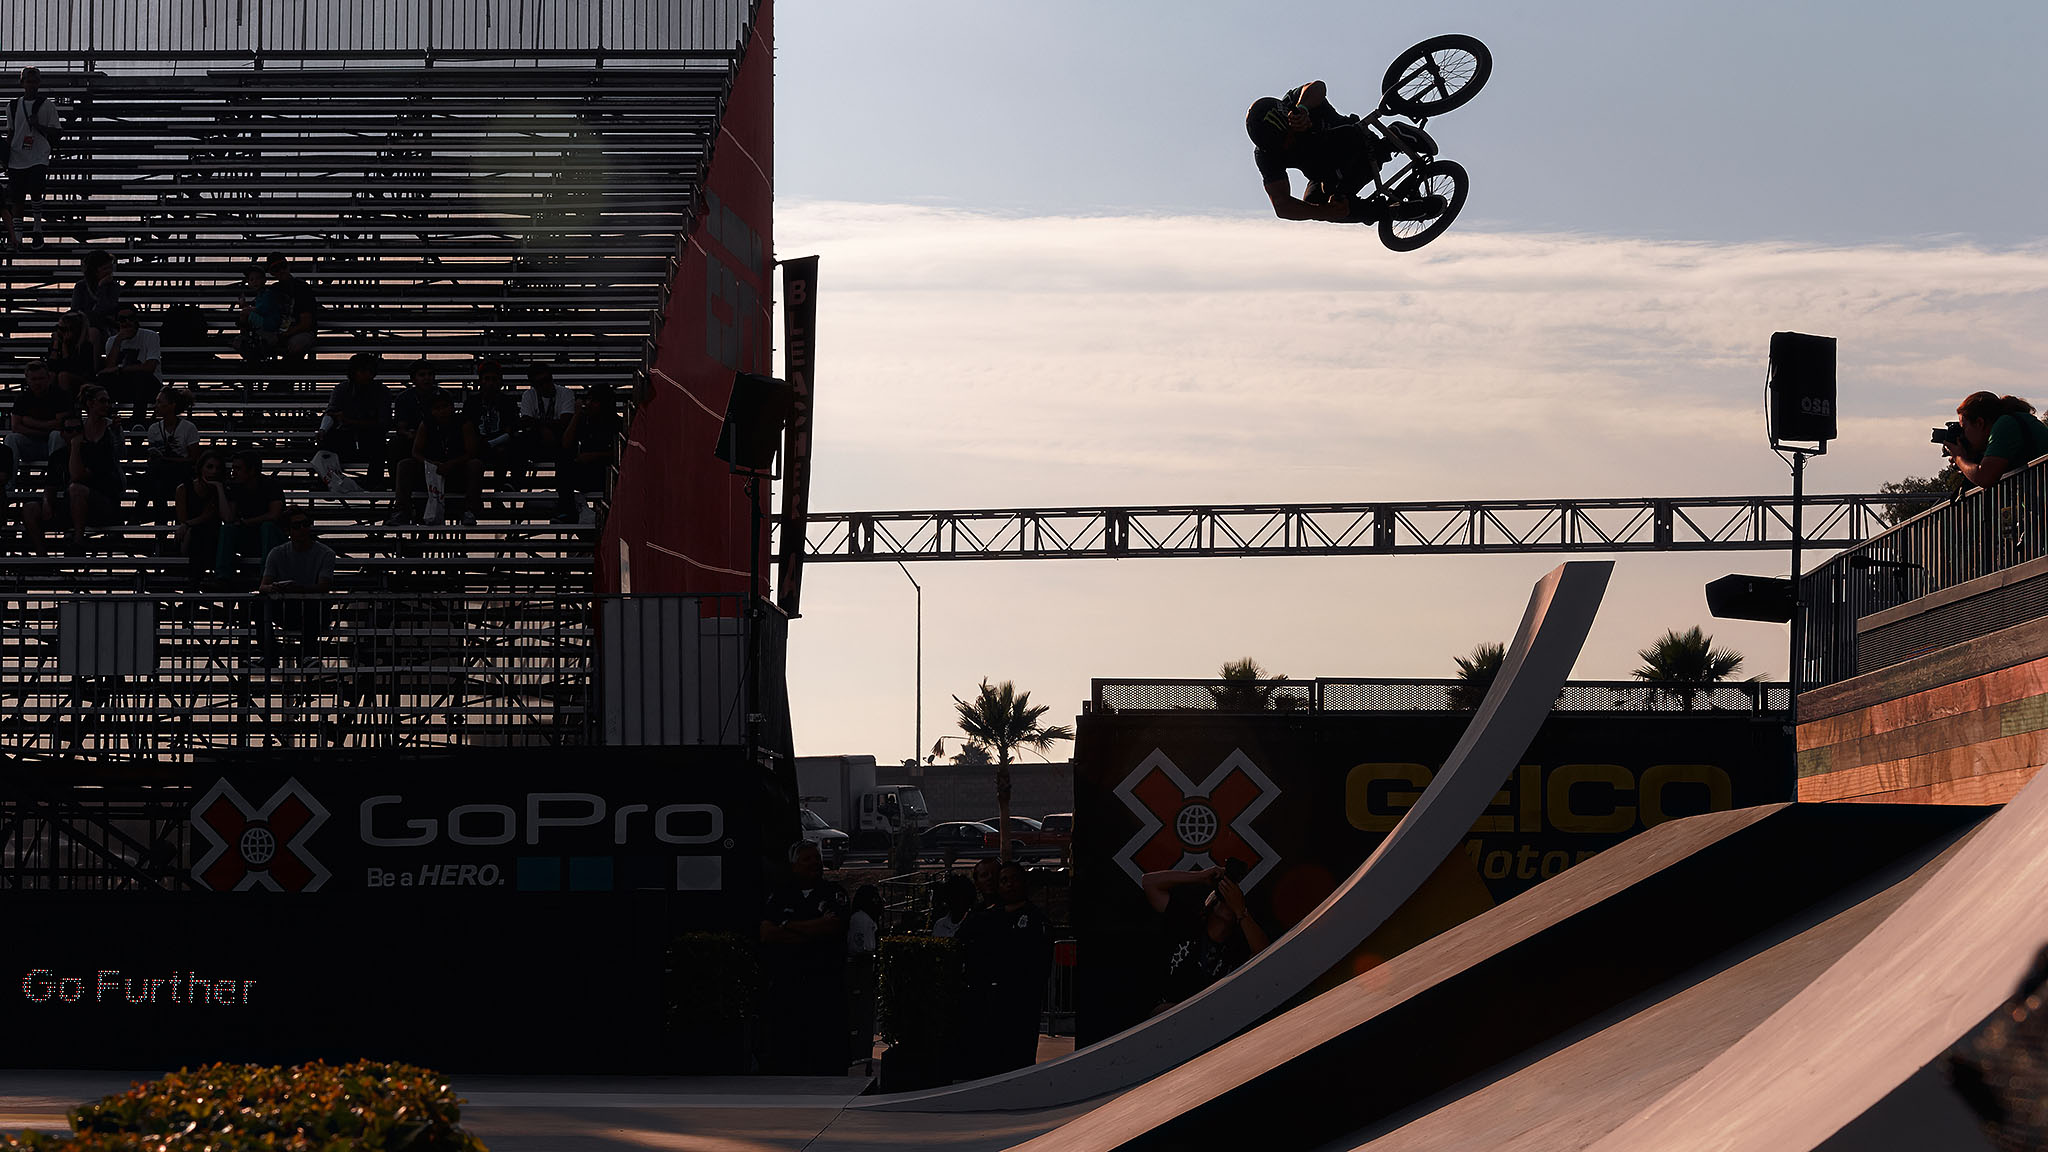 Following a string of knee injuries that sidelined BMX Street invitee Dakota Roche for the majority of the X Games season, the Huntington Beach, Calif., local returned for X Games Los Angeles. Roche kept it simple and stylish on the narrow quarterpipe transitions that bookended the Event Deck course.